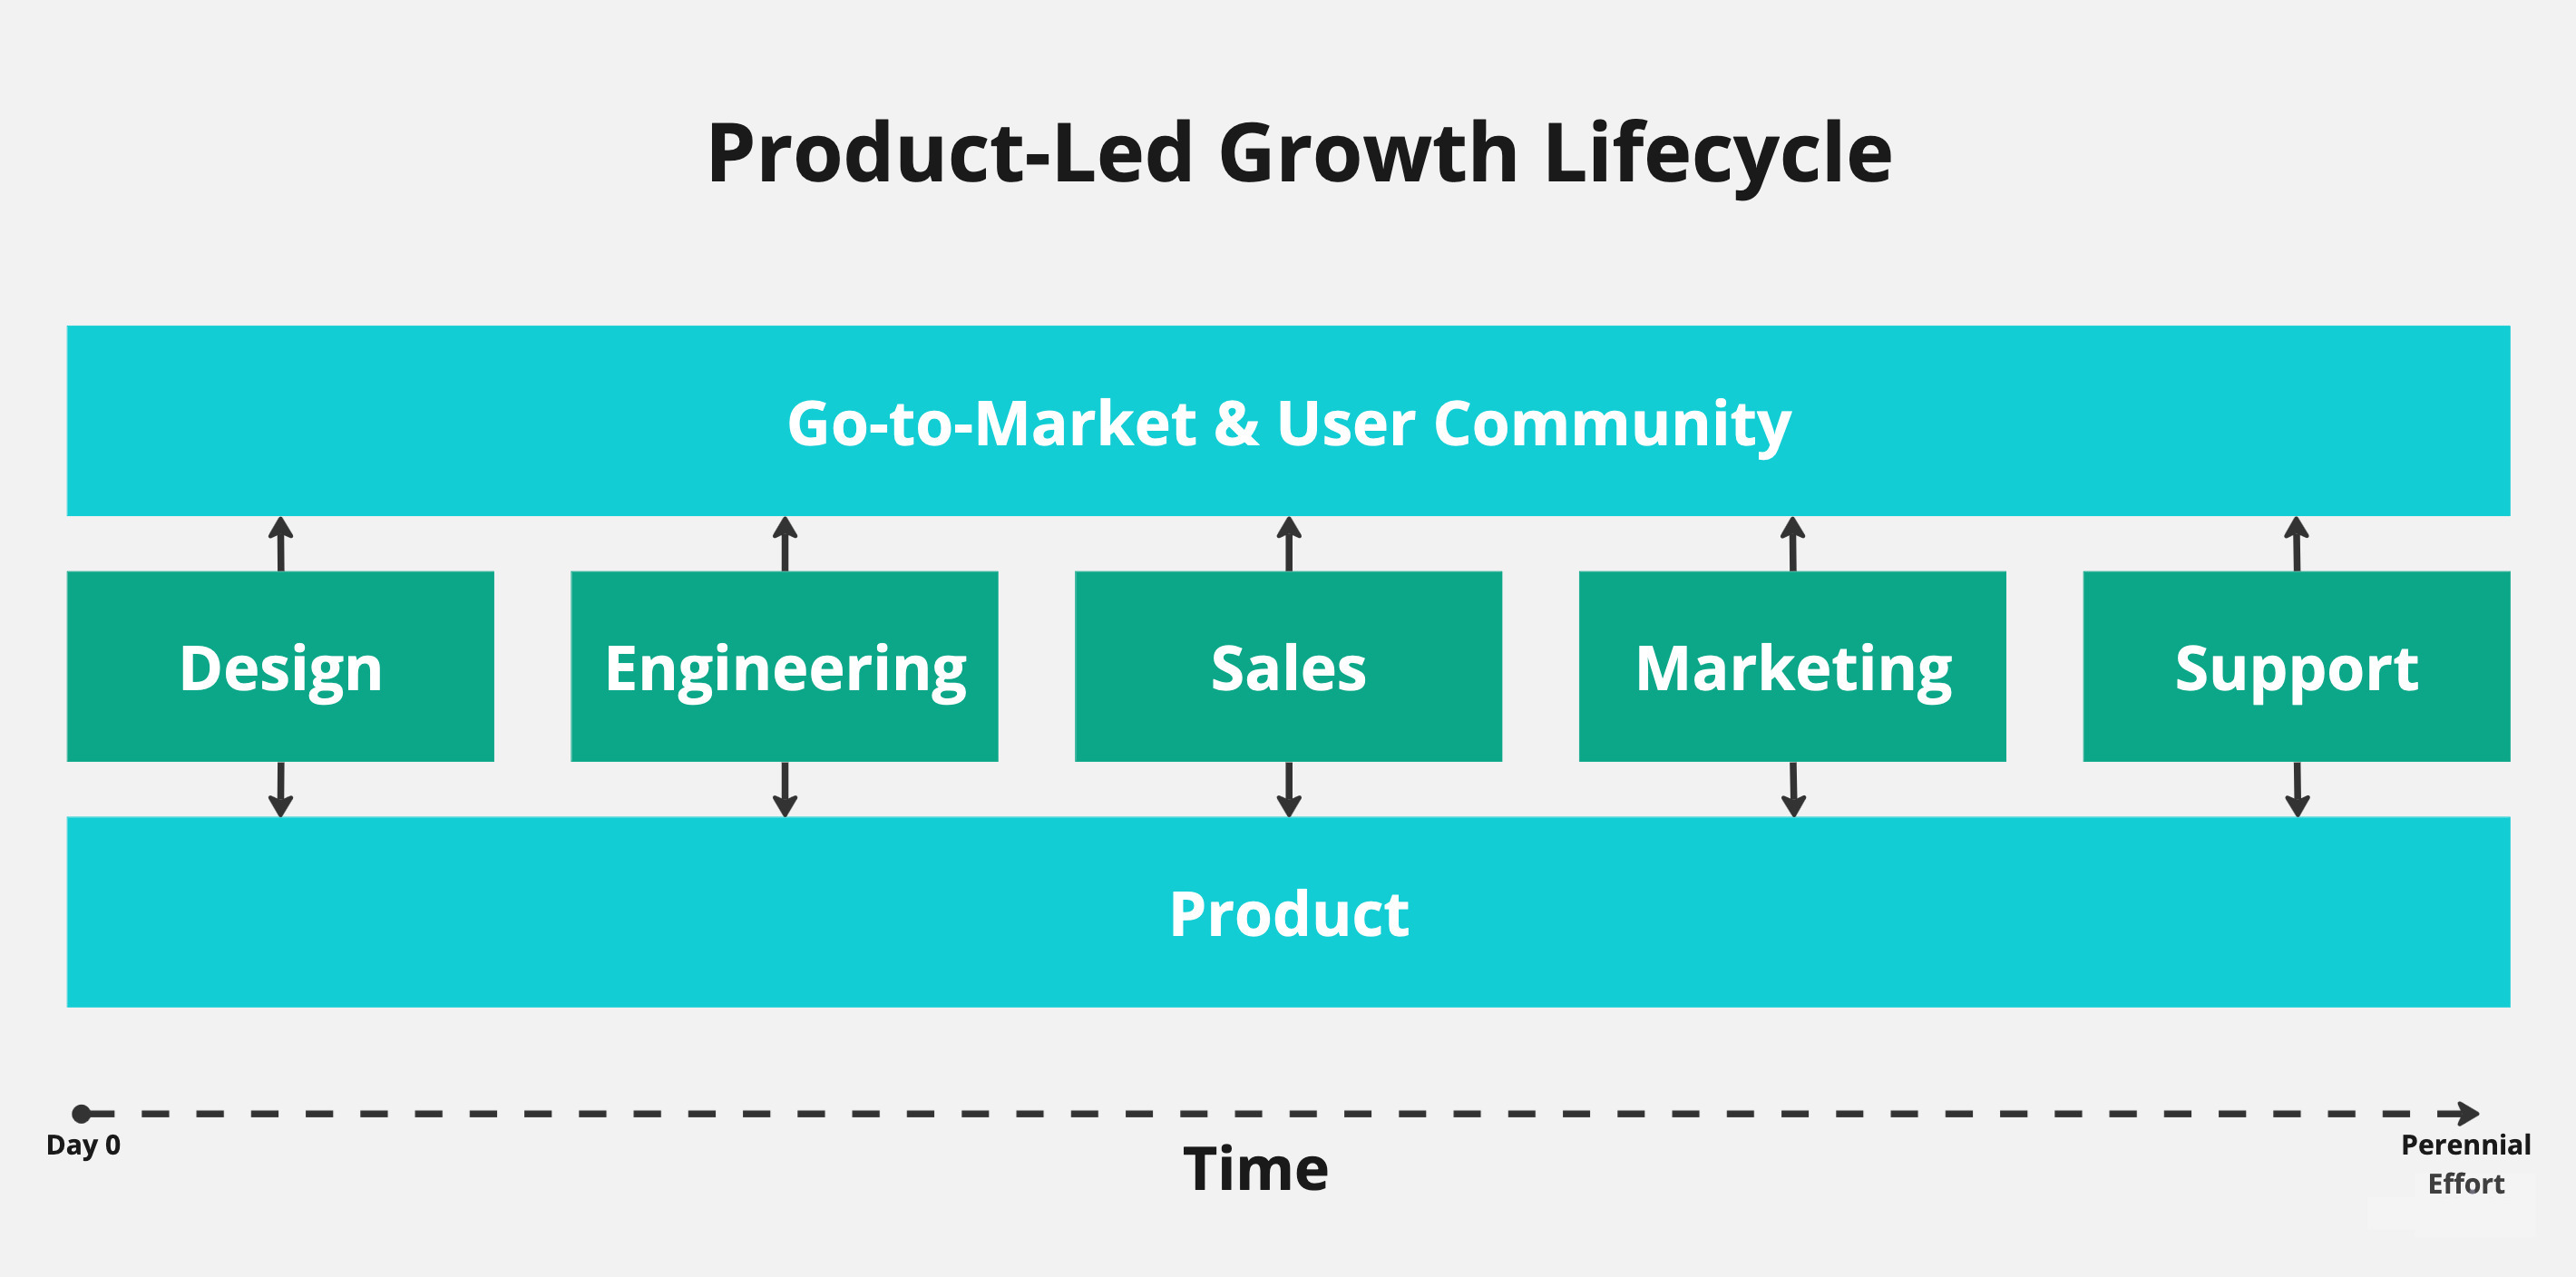 Product-Led Growth Lifecycle